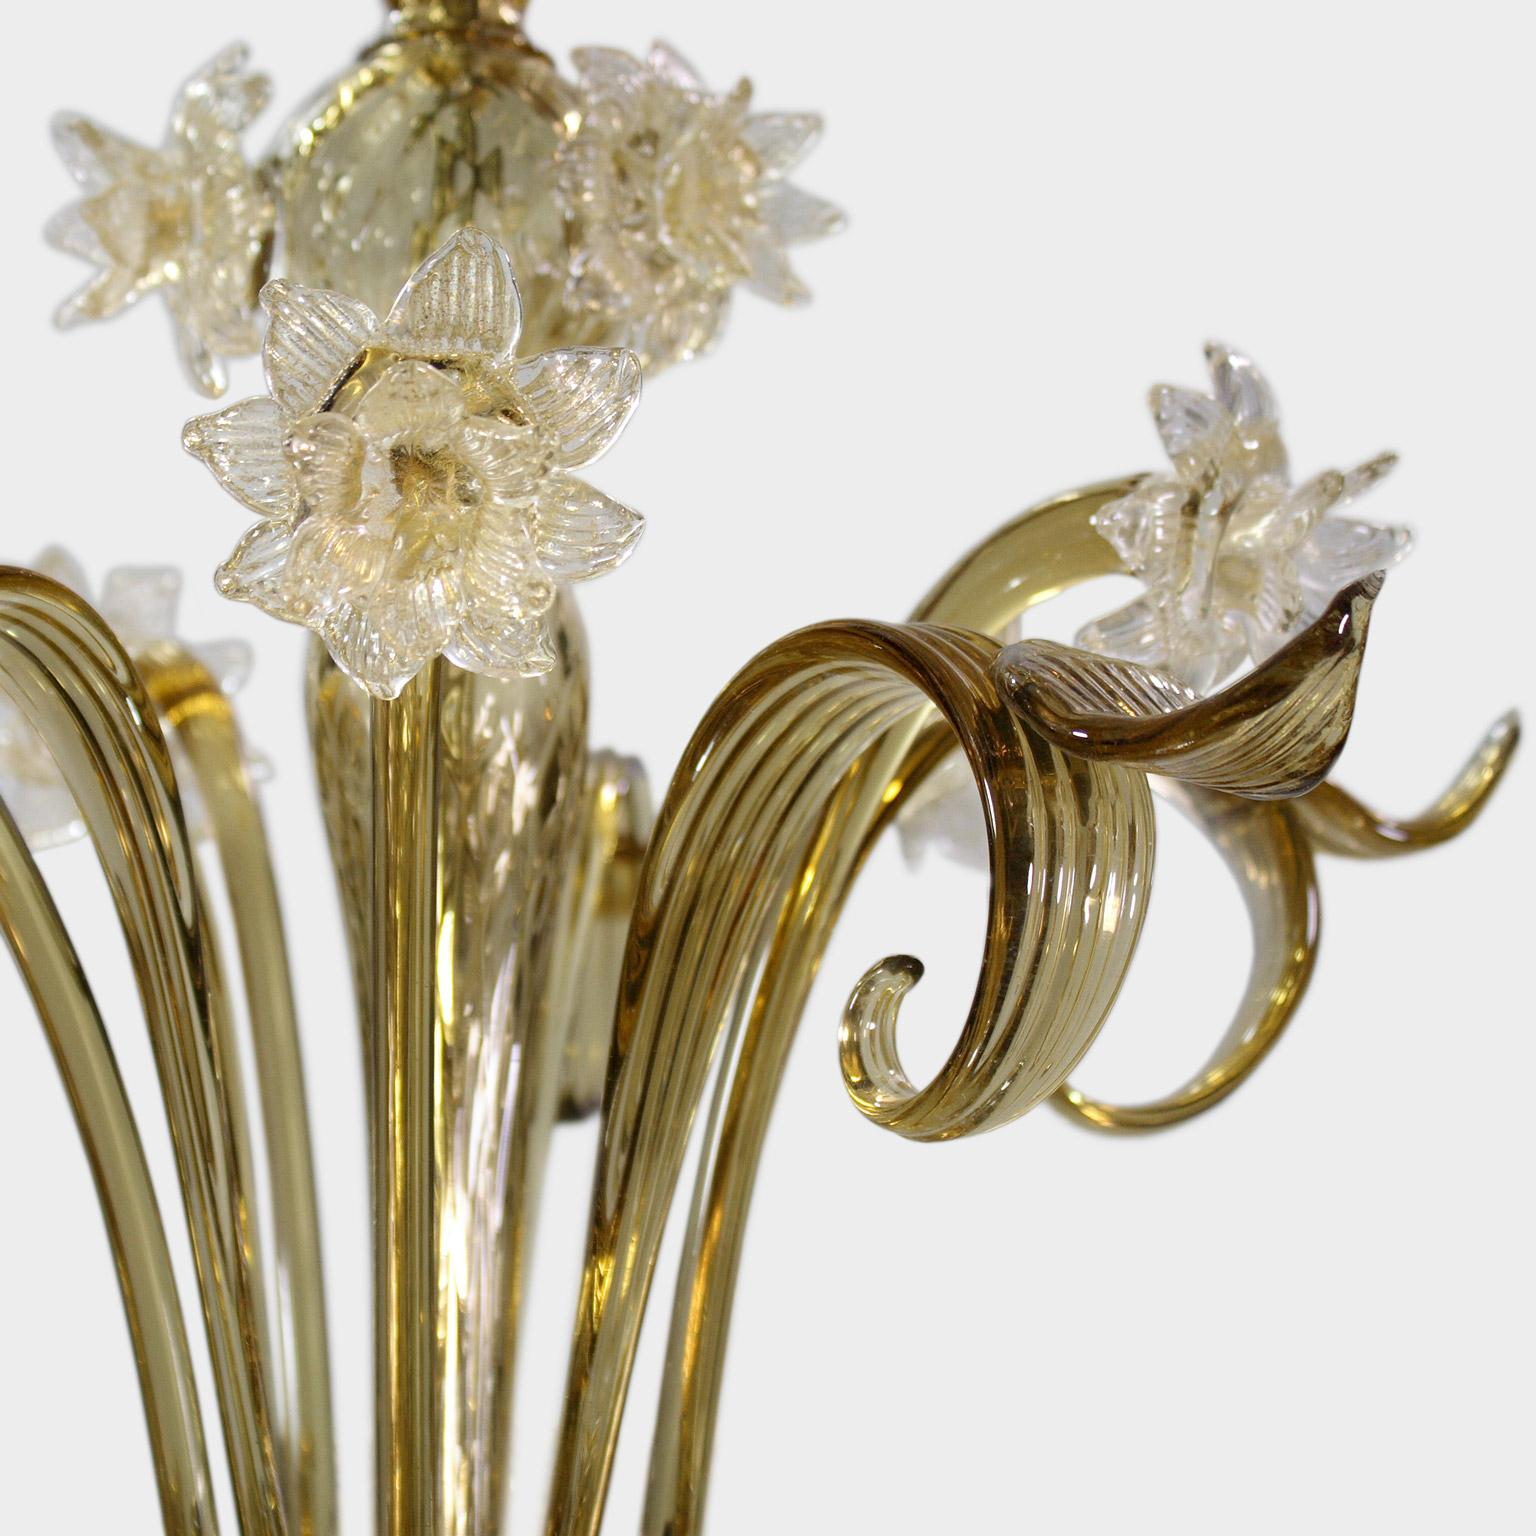 The peculiar characteristic of this lighting work is the richness of its decorations. 
Springtime reflects the authentic Murano glass tradition, which has become famous thanks to the masters glass-worker. Despite its little size, it requires an